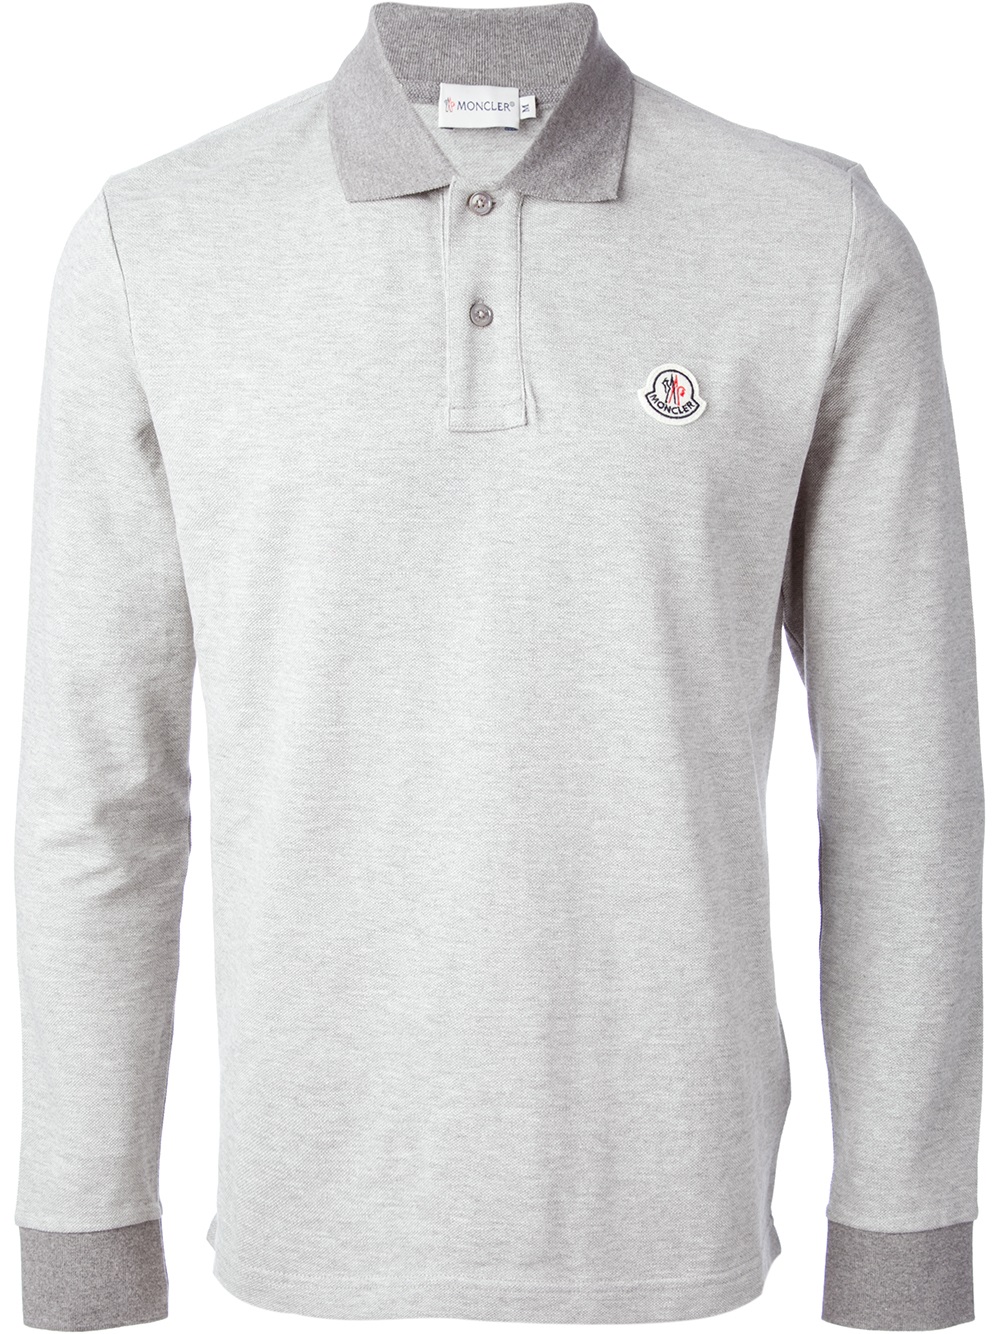 Moncler Long Sleeve Polo Shirt in Grey (Gray) for Men - Lyst